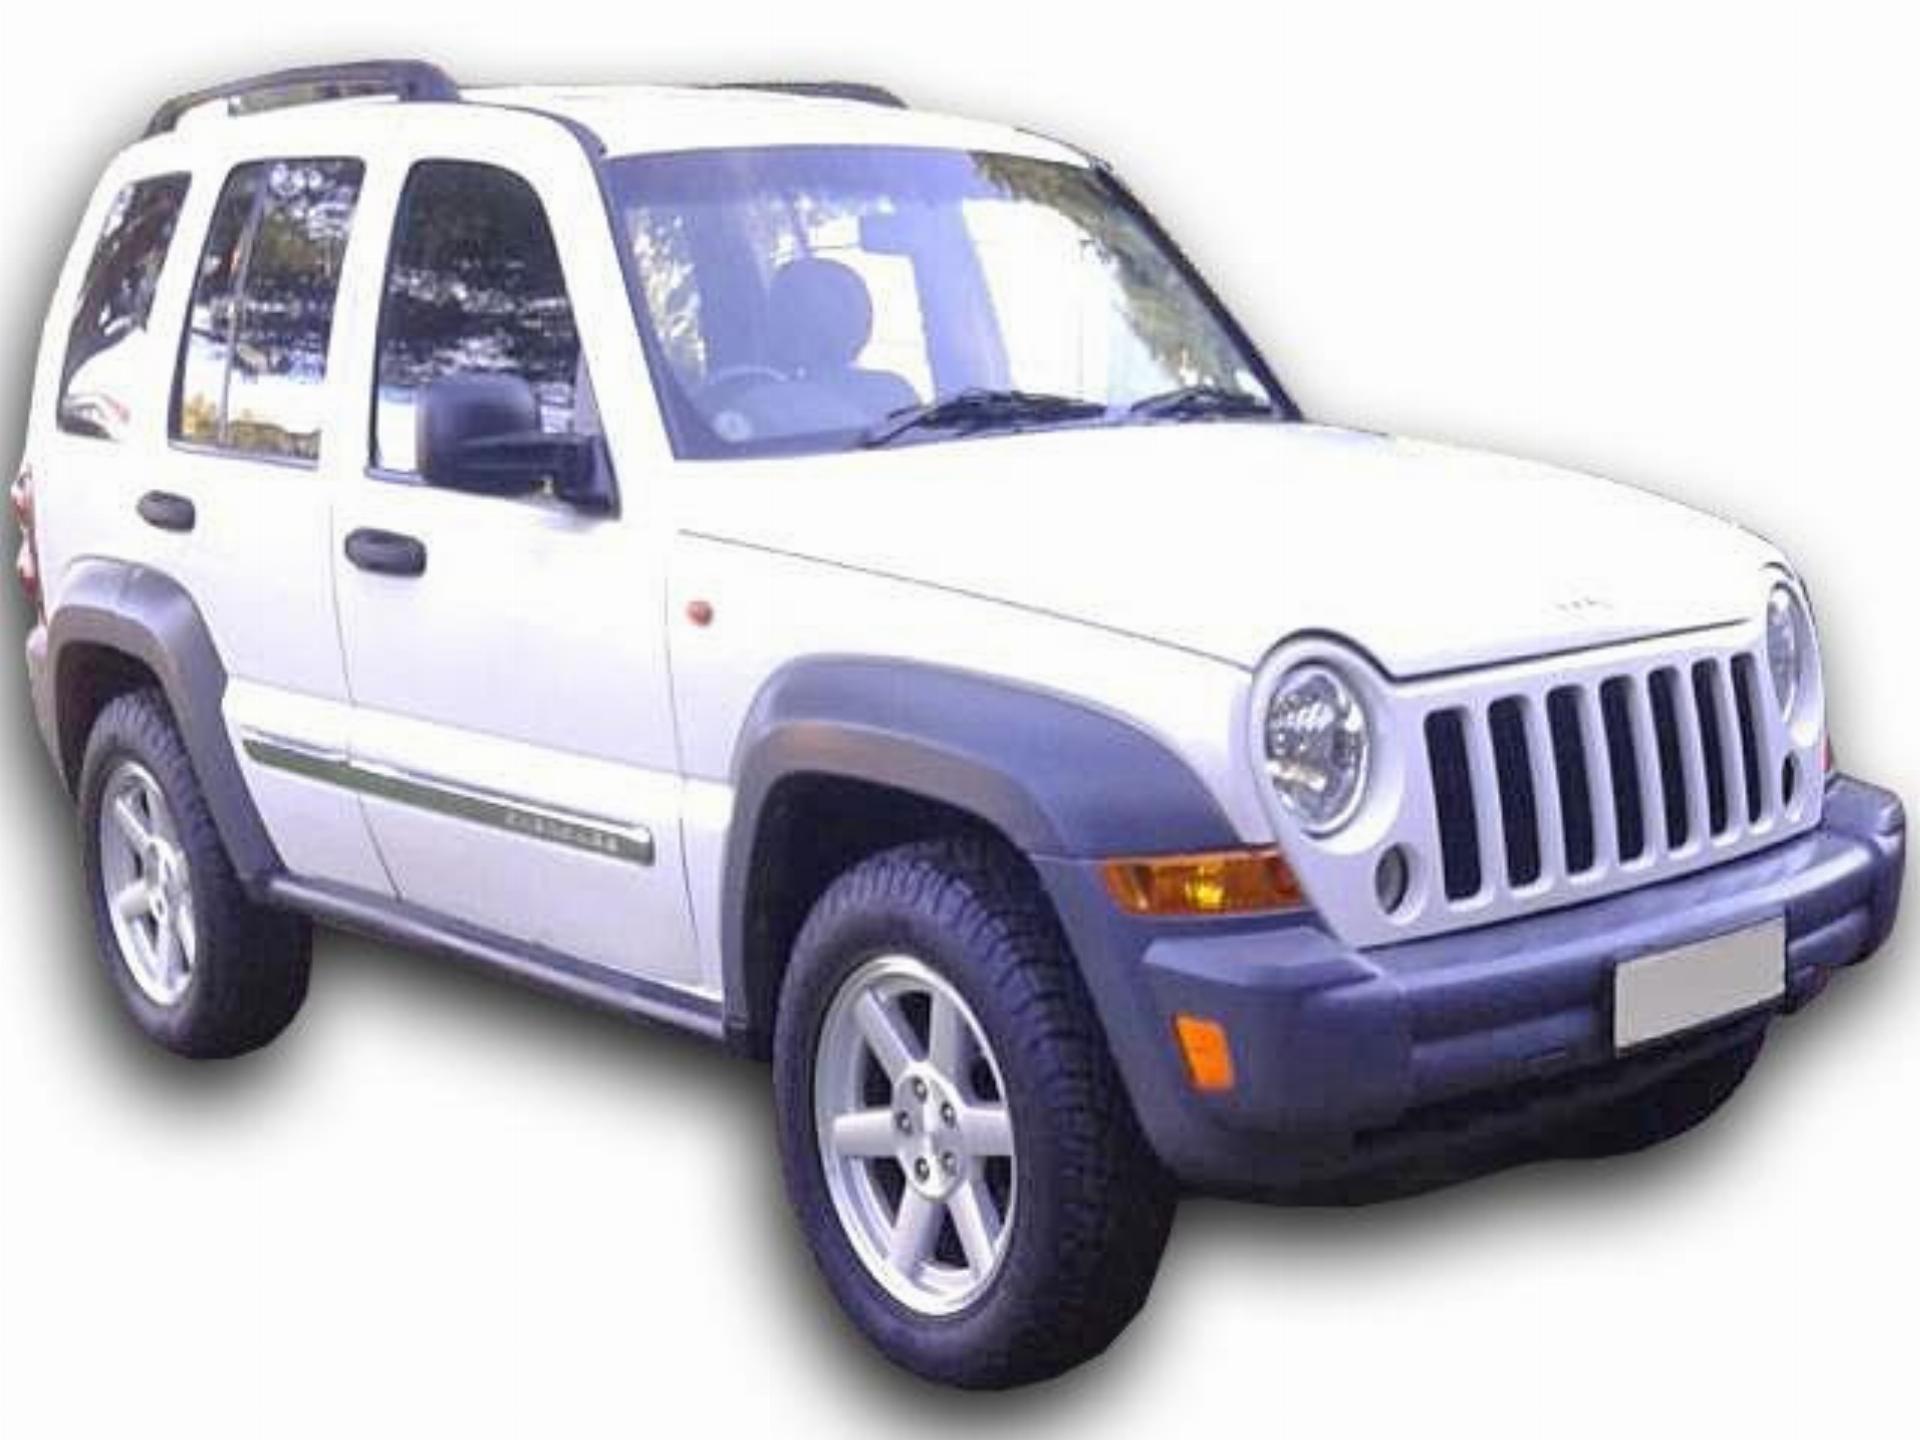 Used Jeep Cherokee 2.8 CRD Auto 4X4 2005 on auction